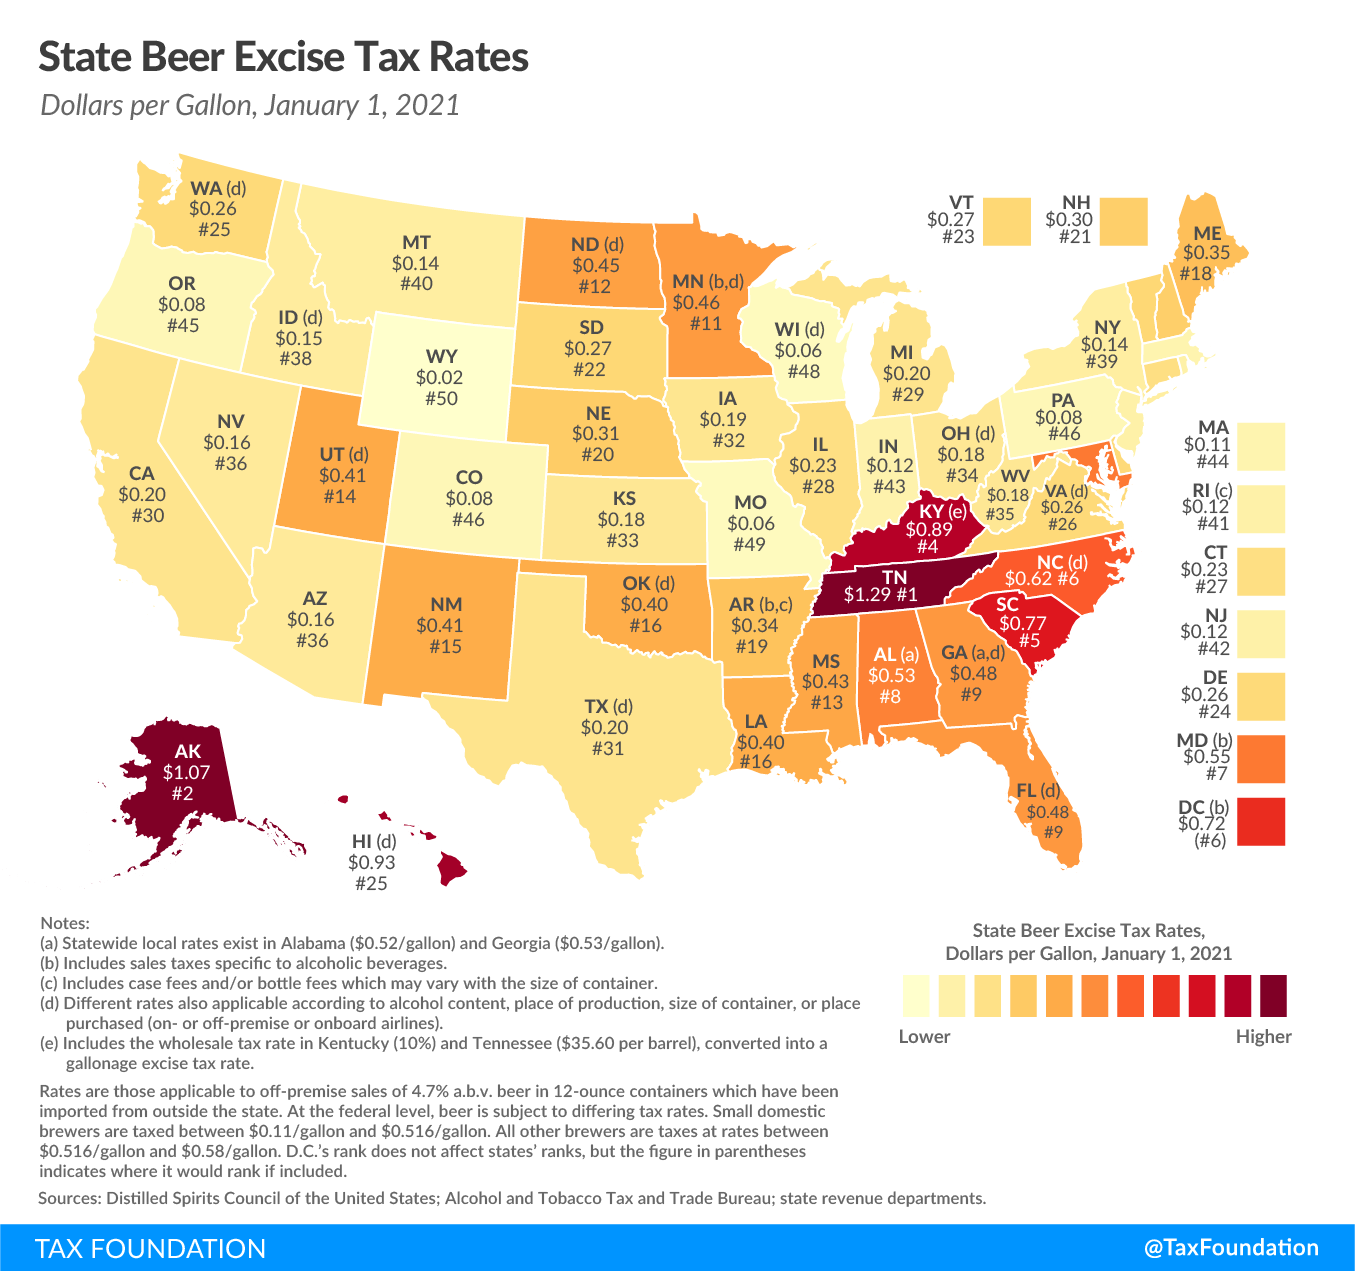 2021 state beer tax rates, 2021 taxes on beer, 2021 excise taxes and 2021 excise tax trends